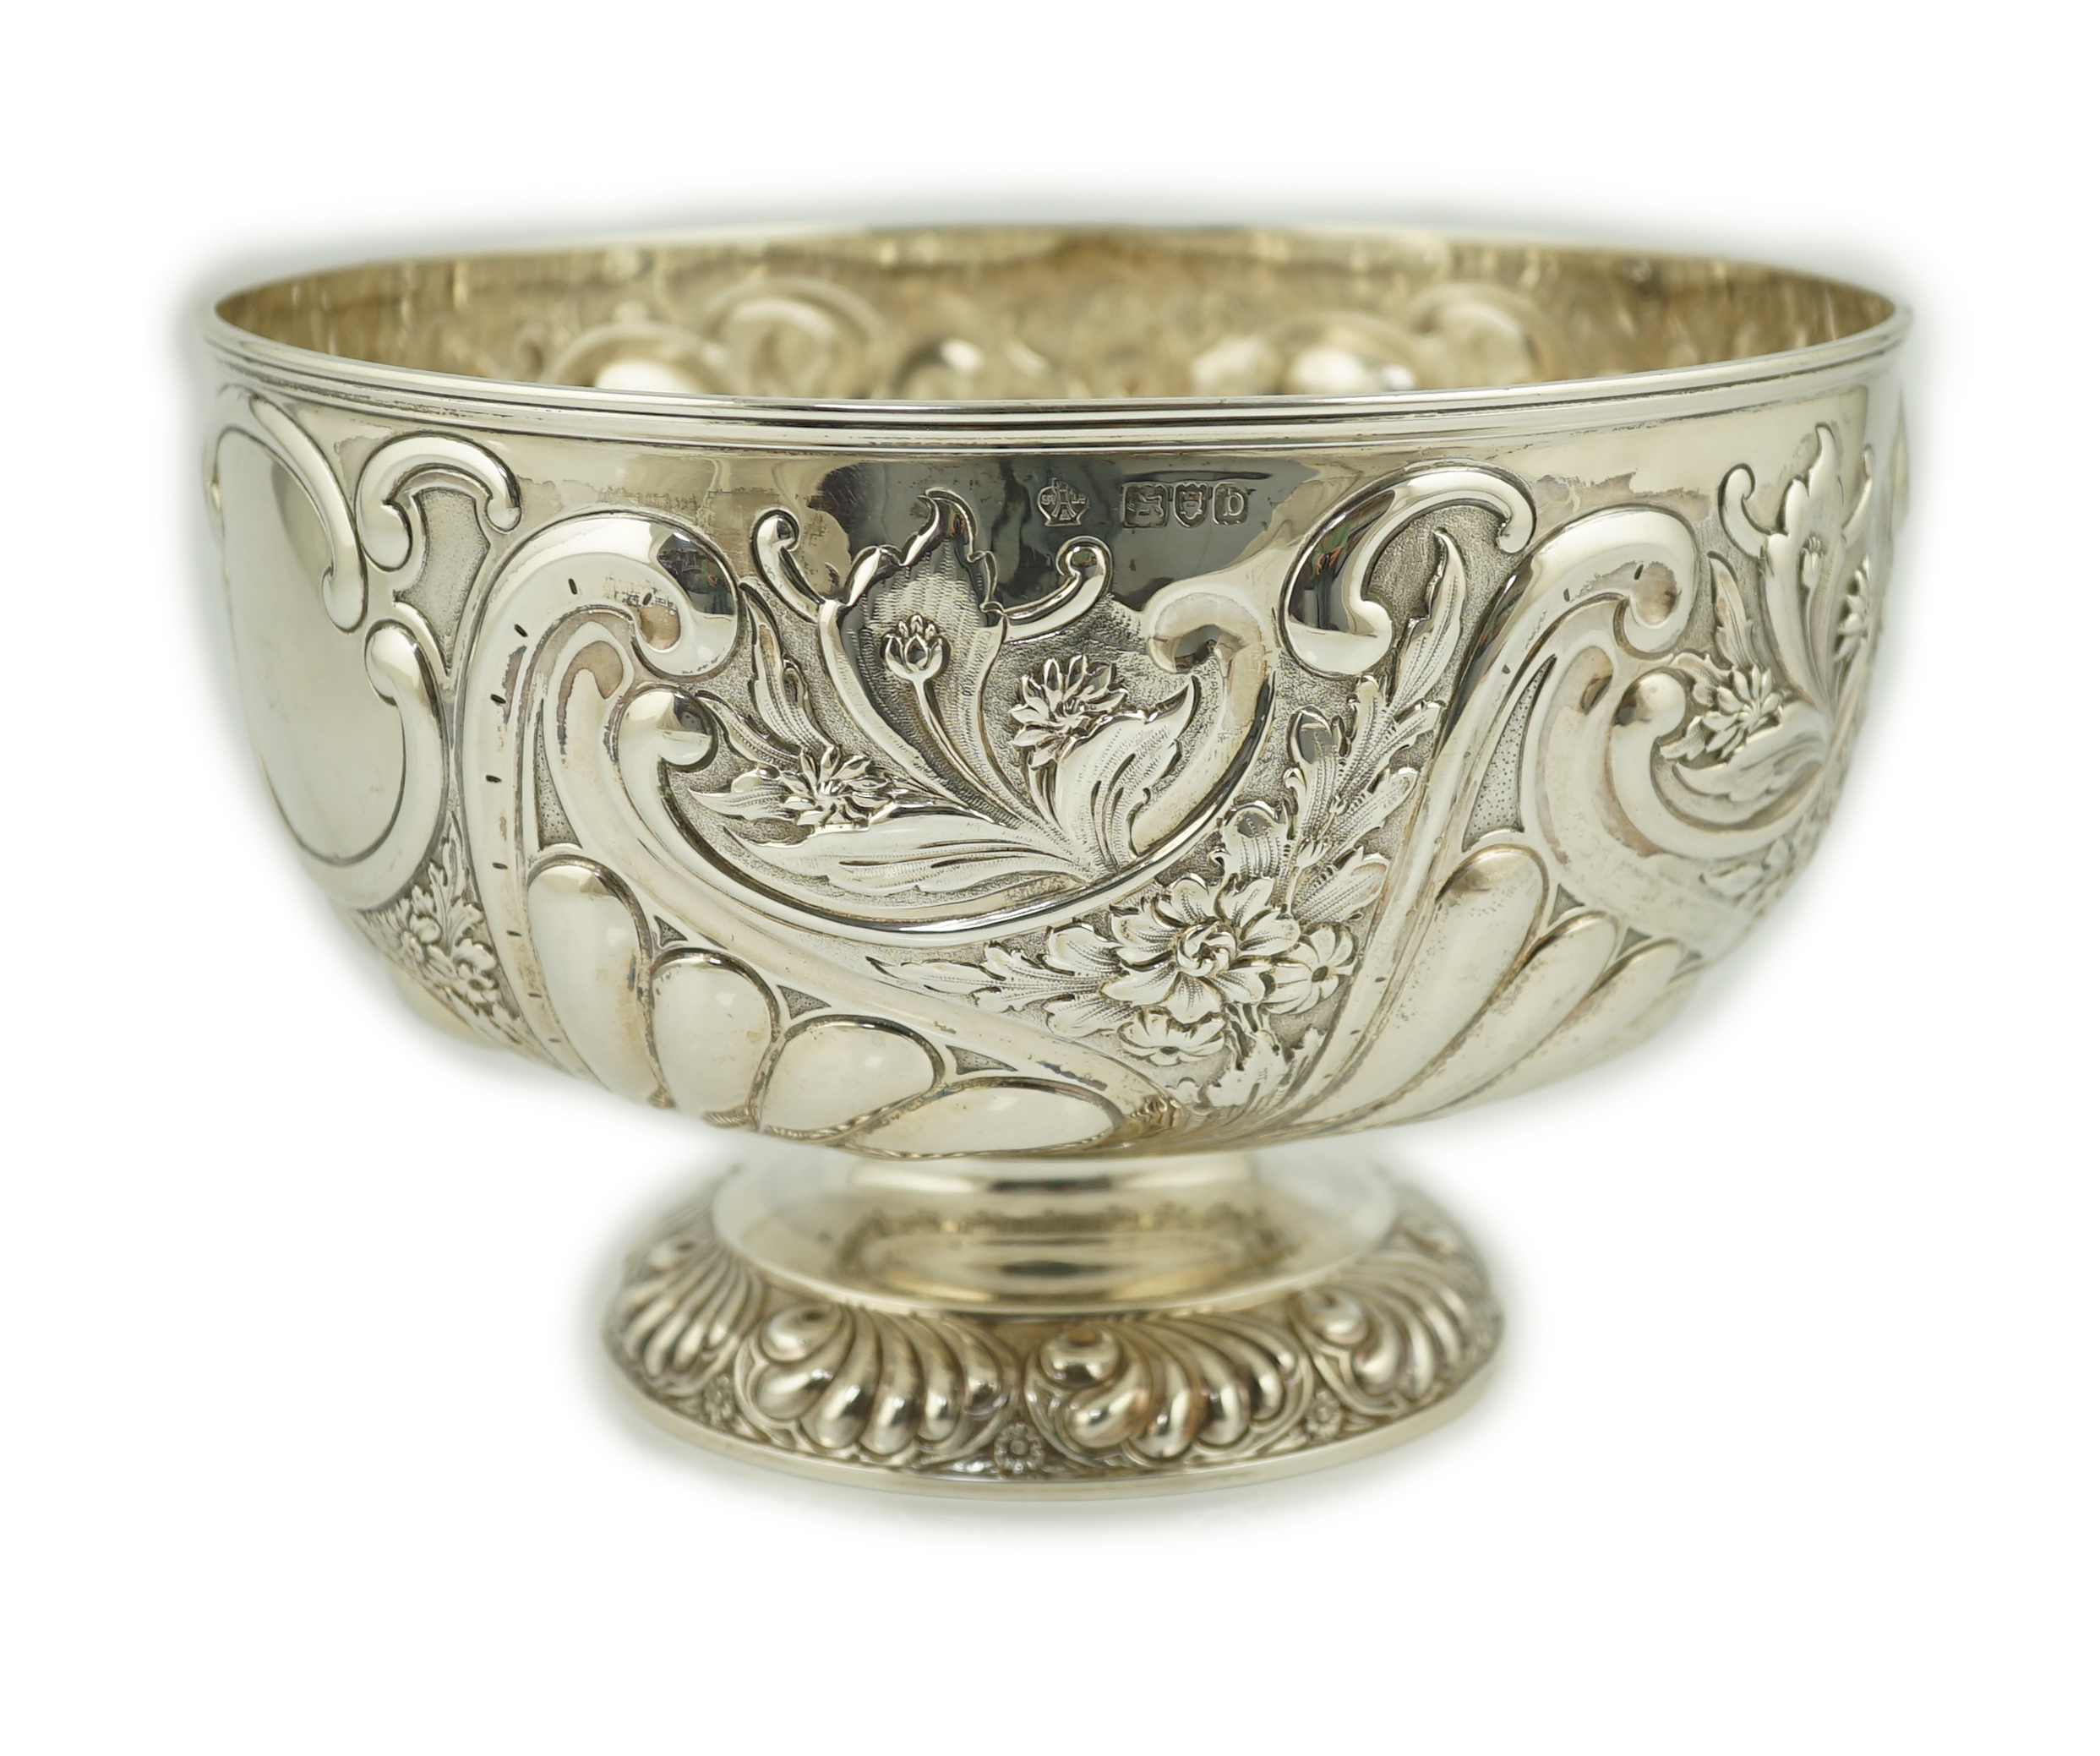 A late Victorian repousse silver rose bowl, by William Hutton & Sons